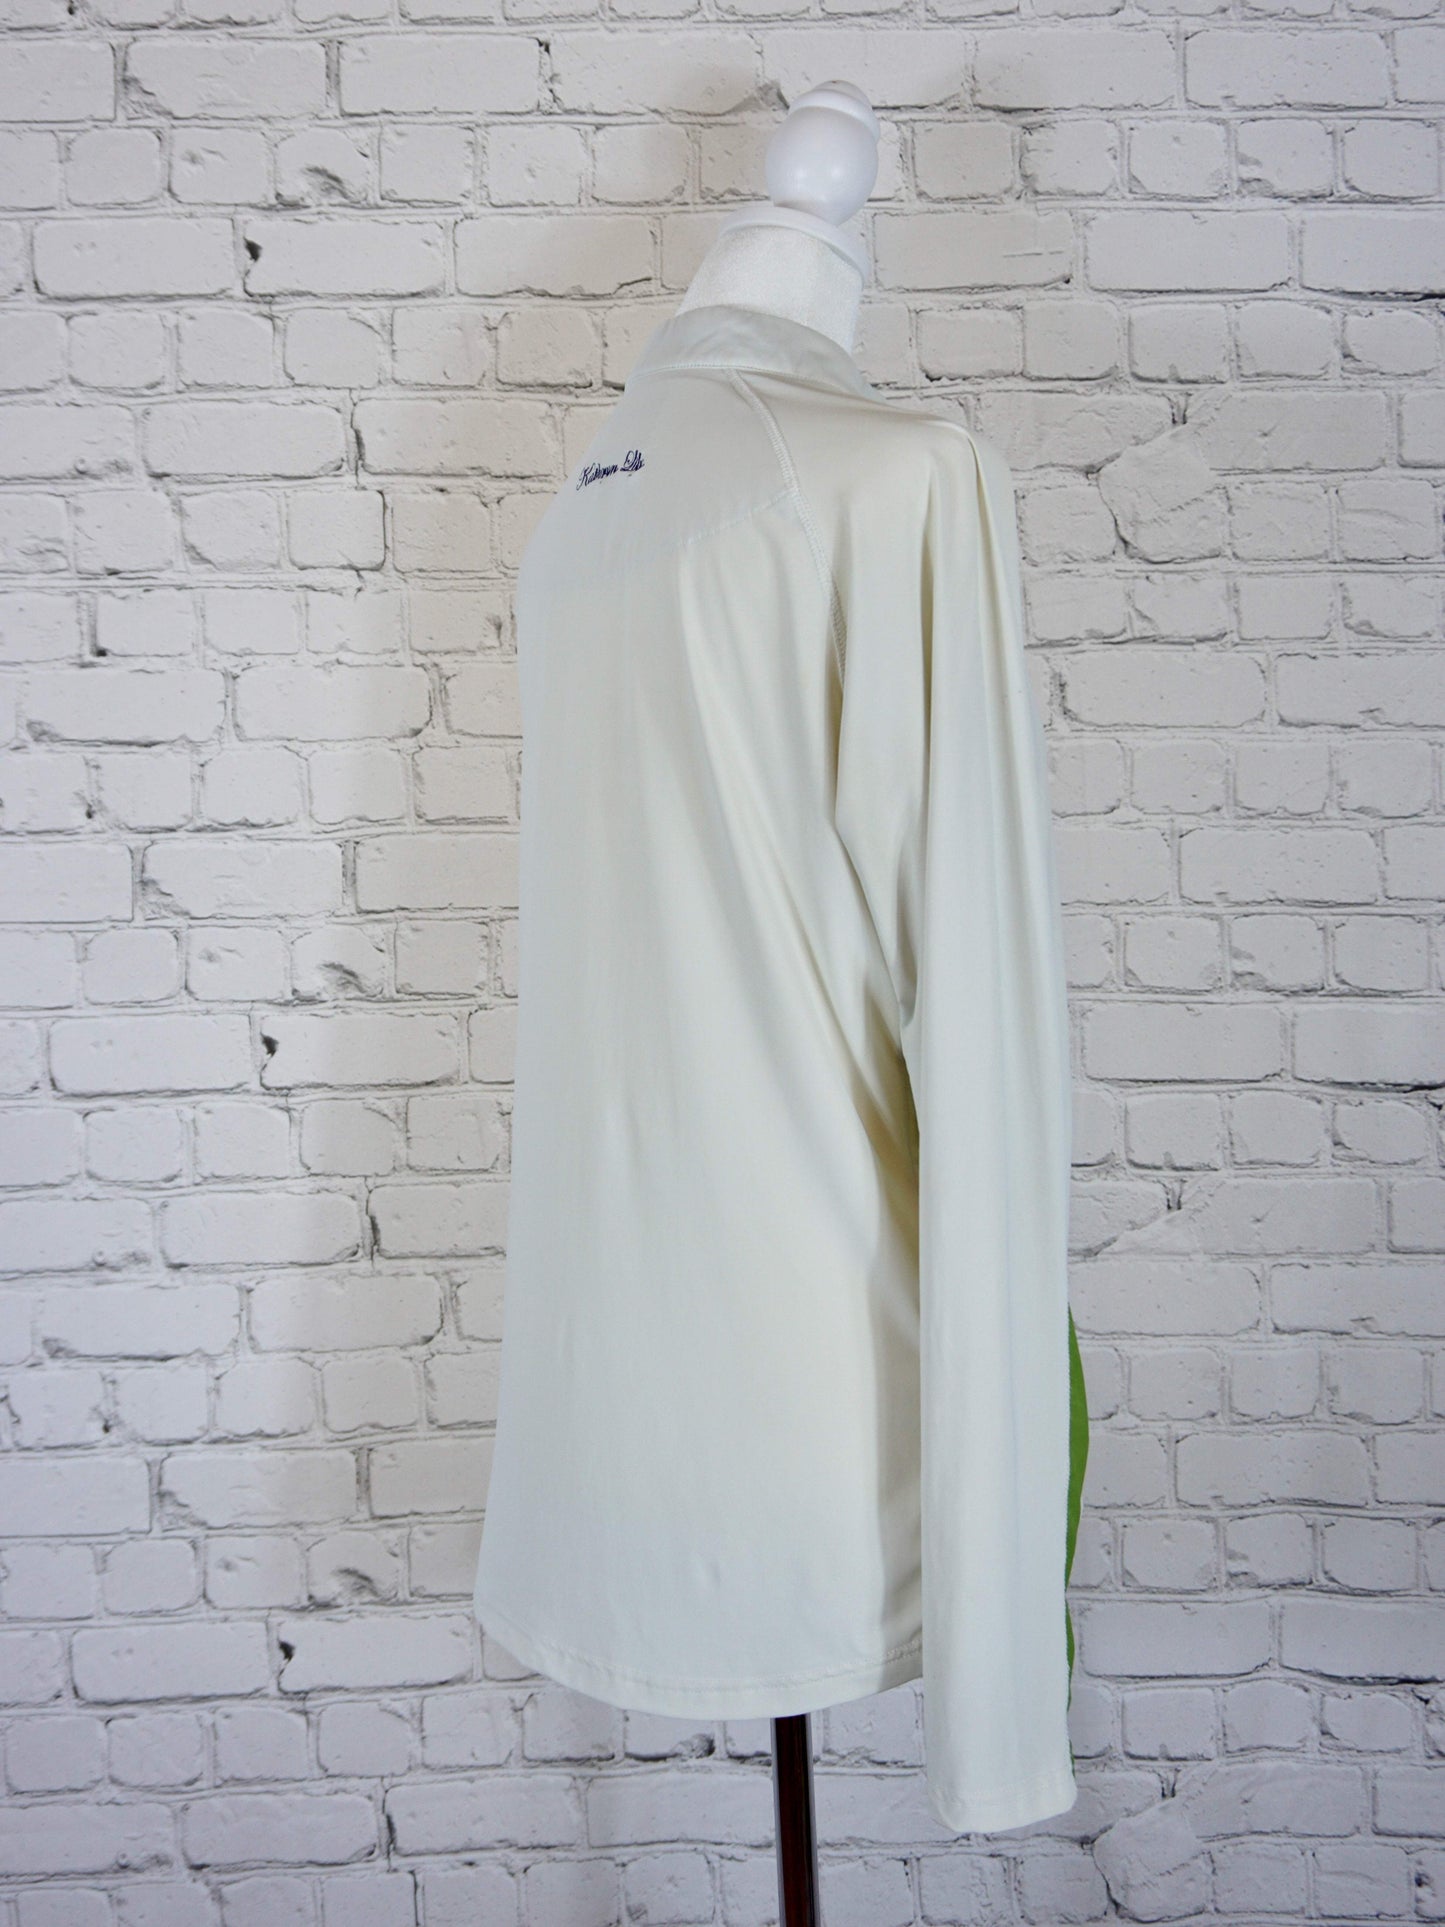 Kathryn Lilly Sunshirt in White/Green- Size Large